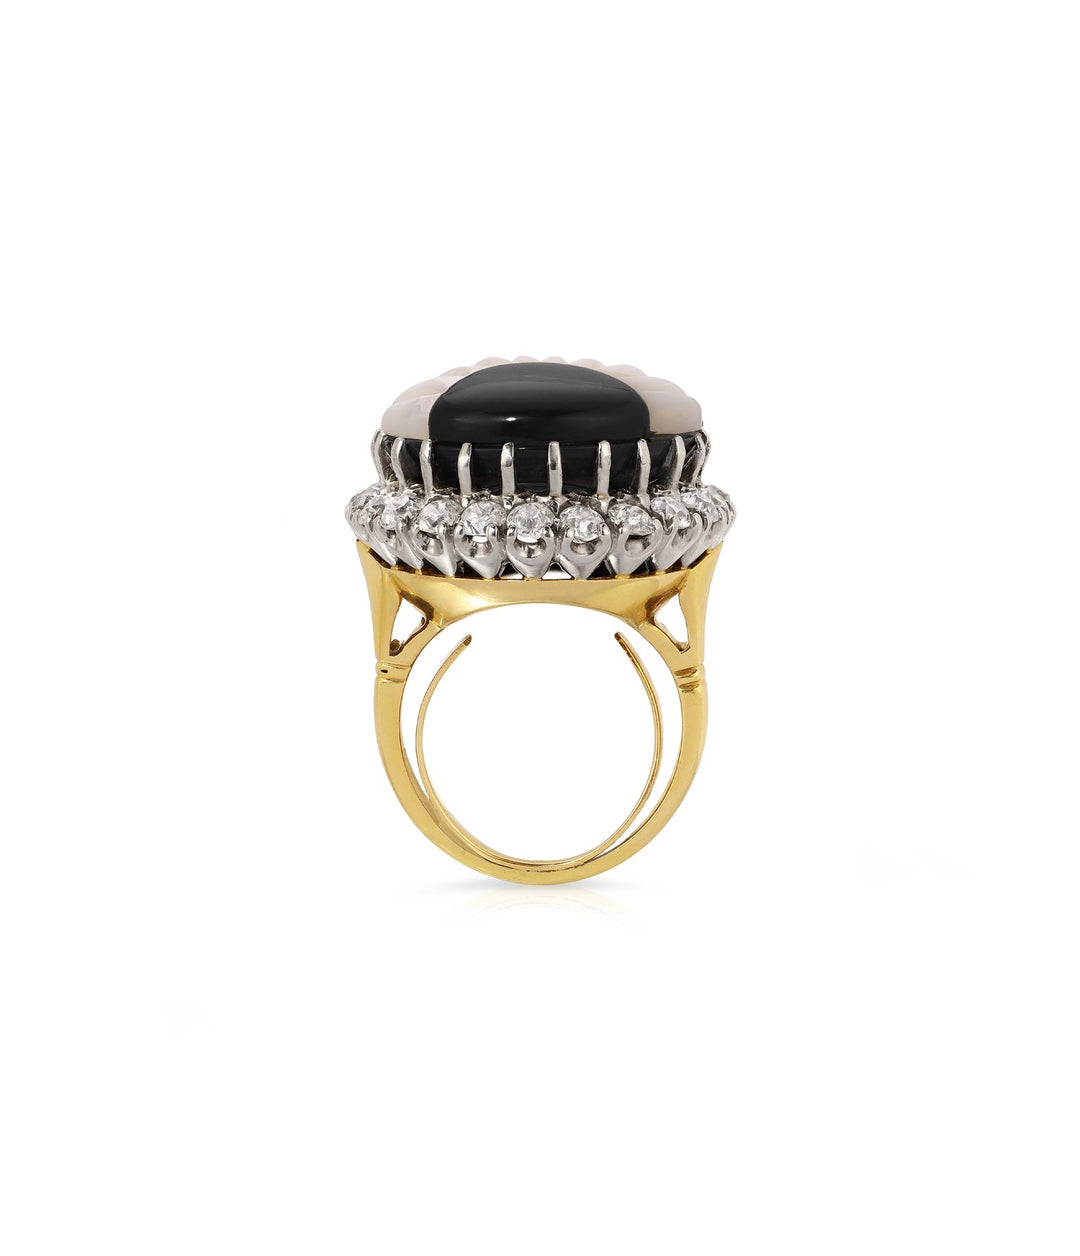 Mother of Pearl, Onyx and Diamond Shell Ring in 14K Gold